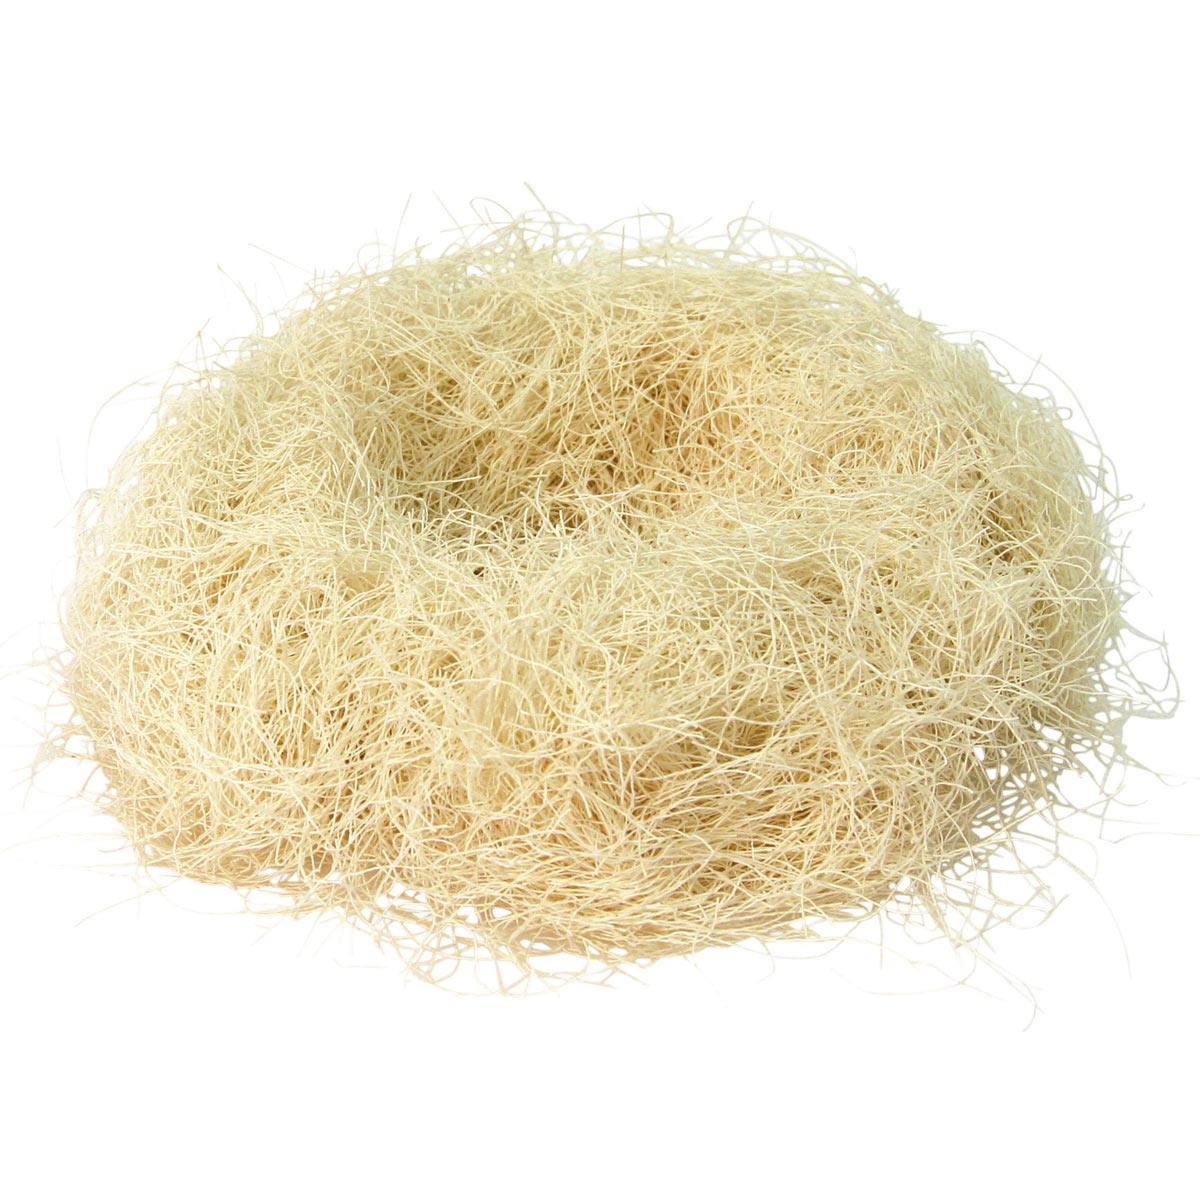 Nesting material for rodents & birds 50 g